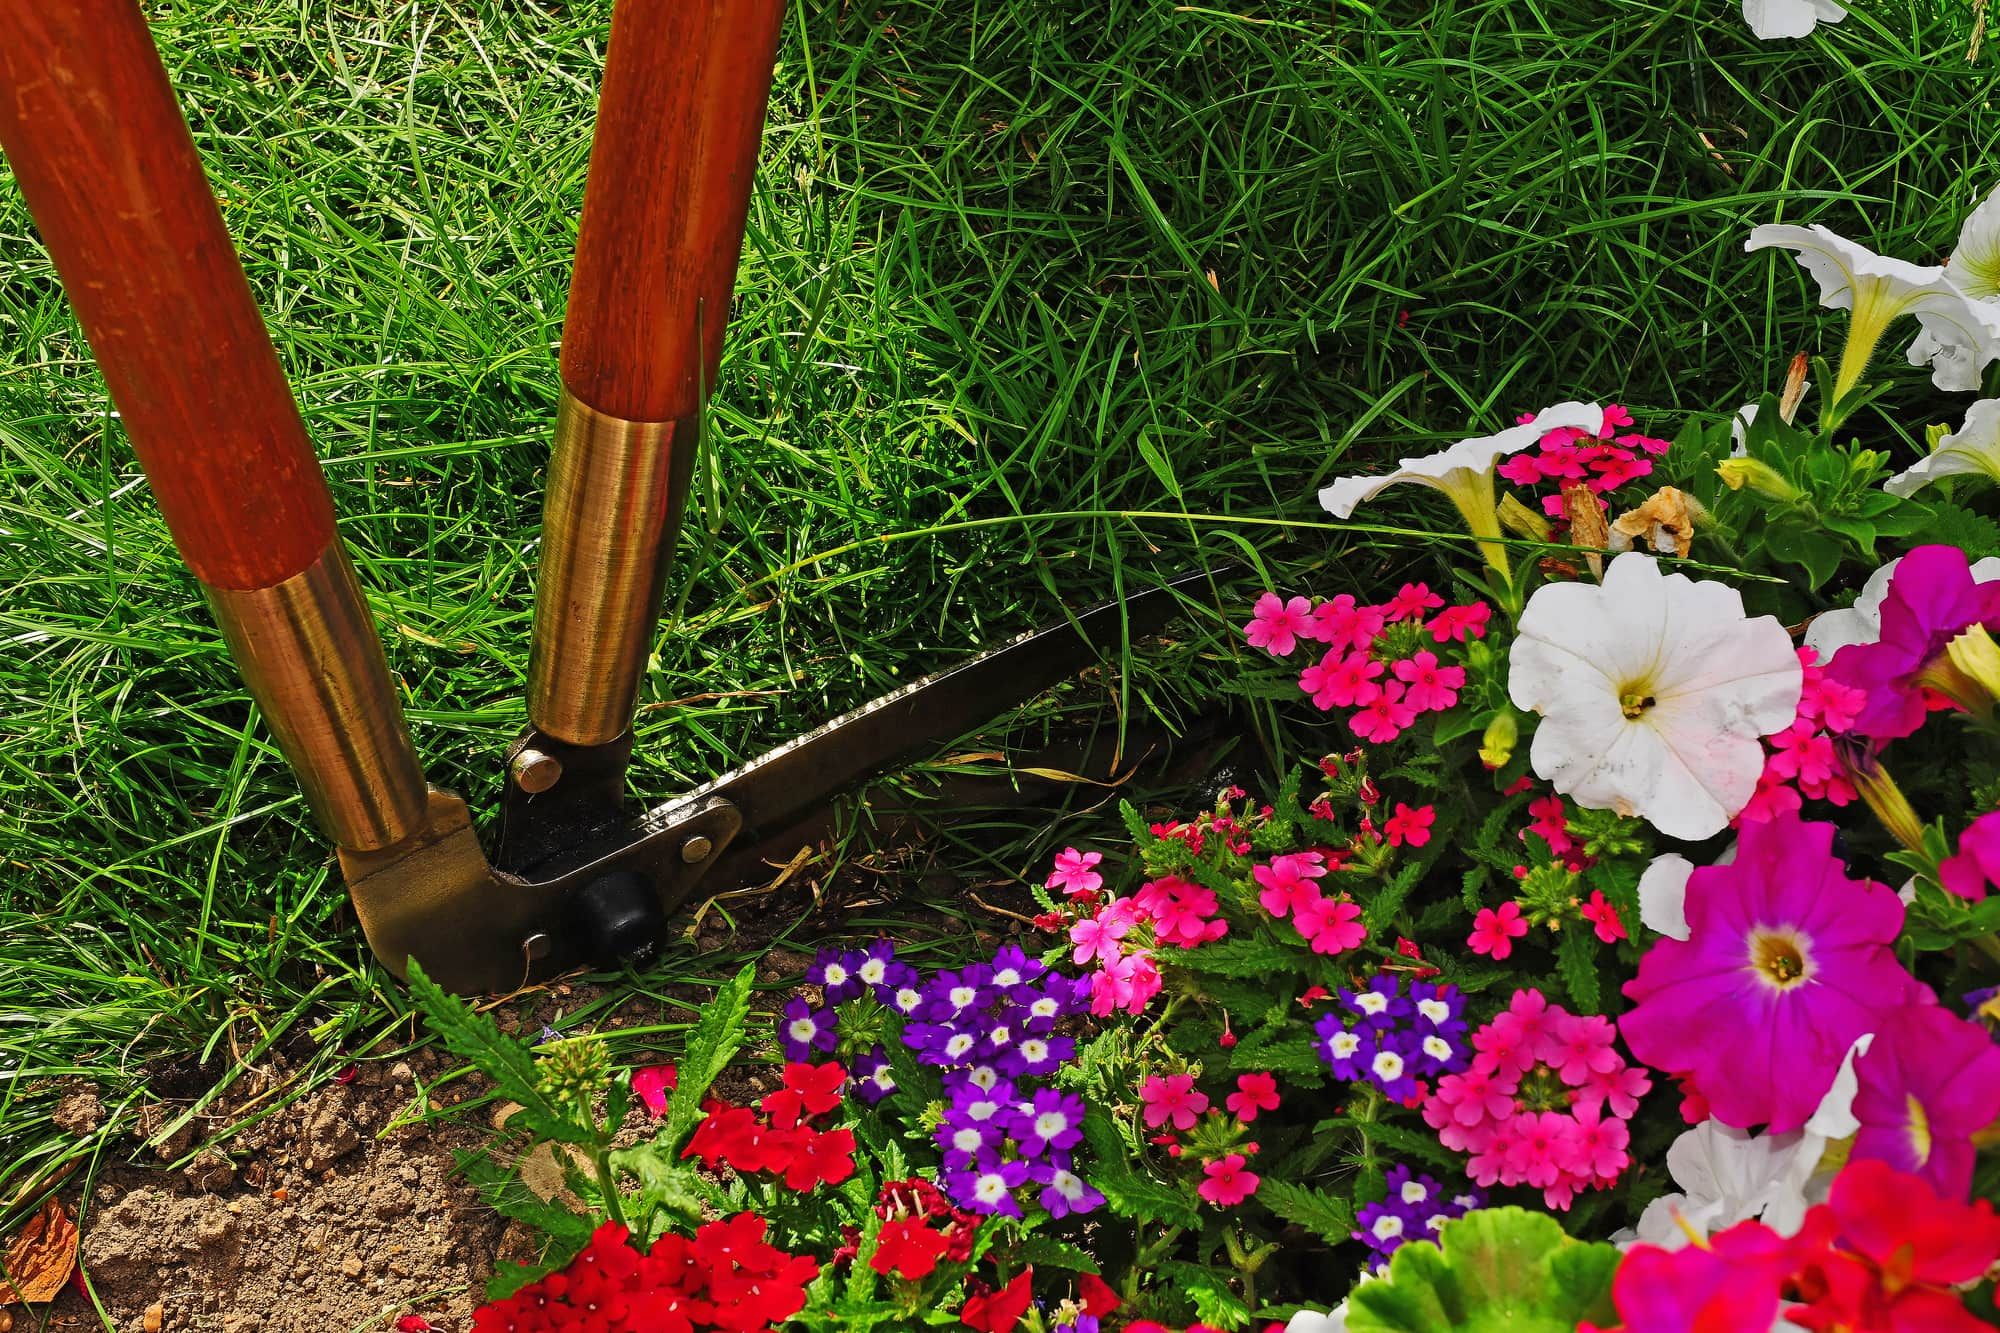 Shears trimming the edge of a garden with flowers in the foreground